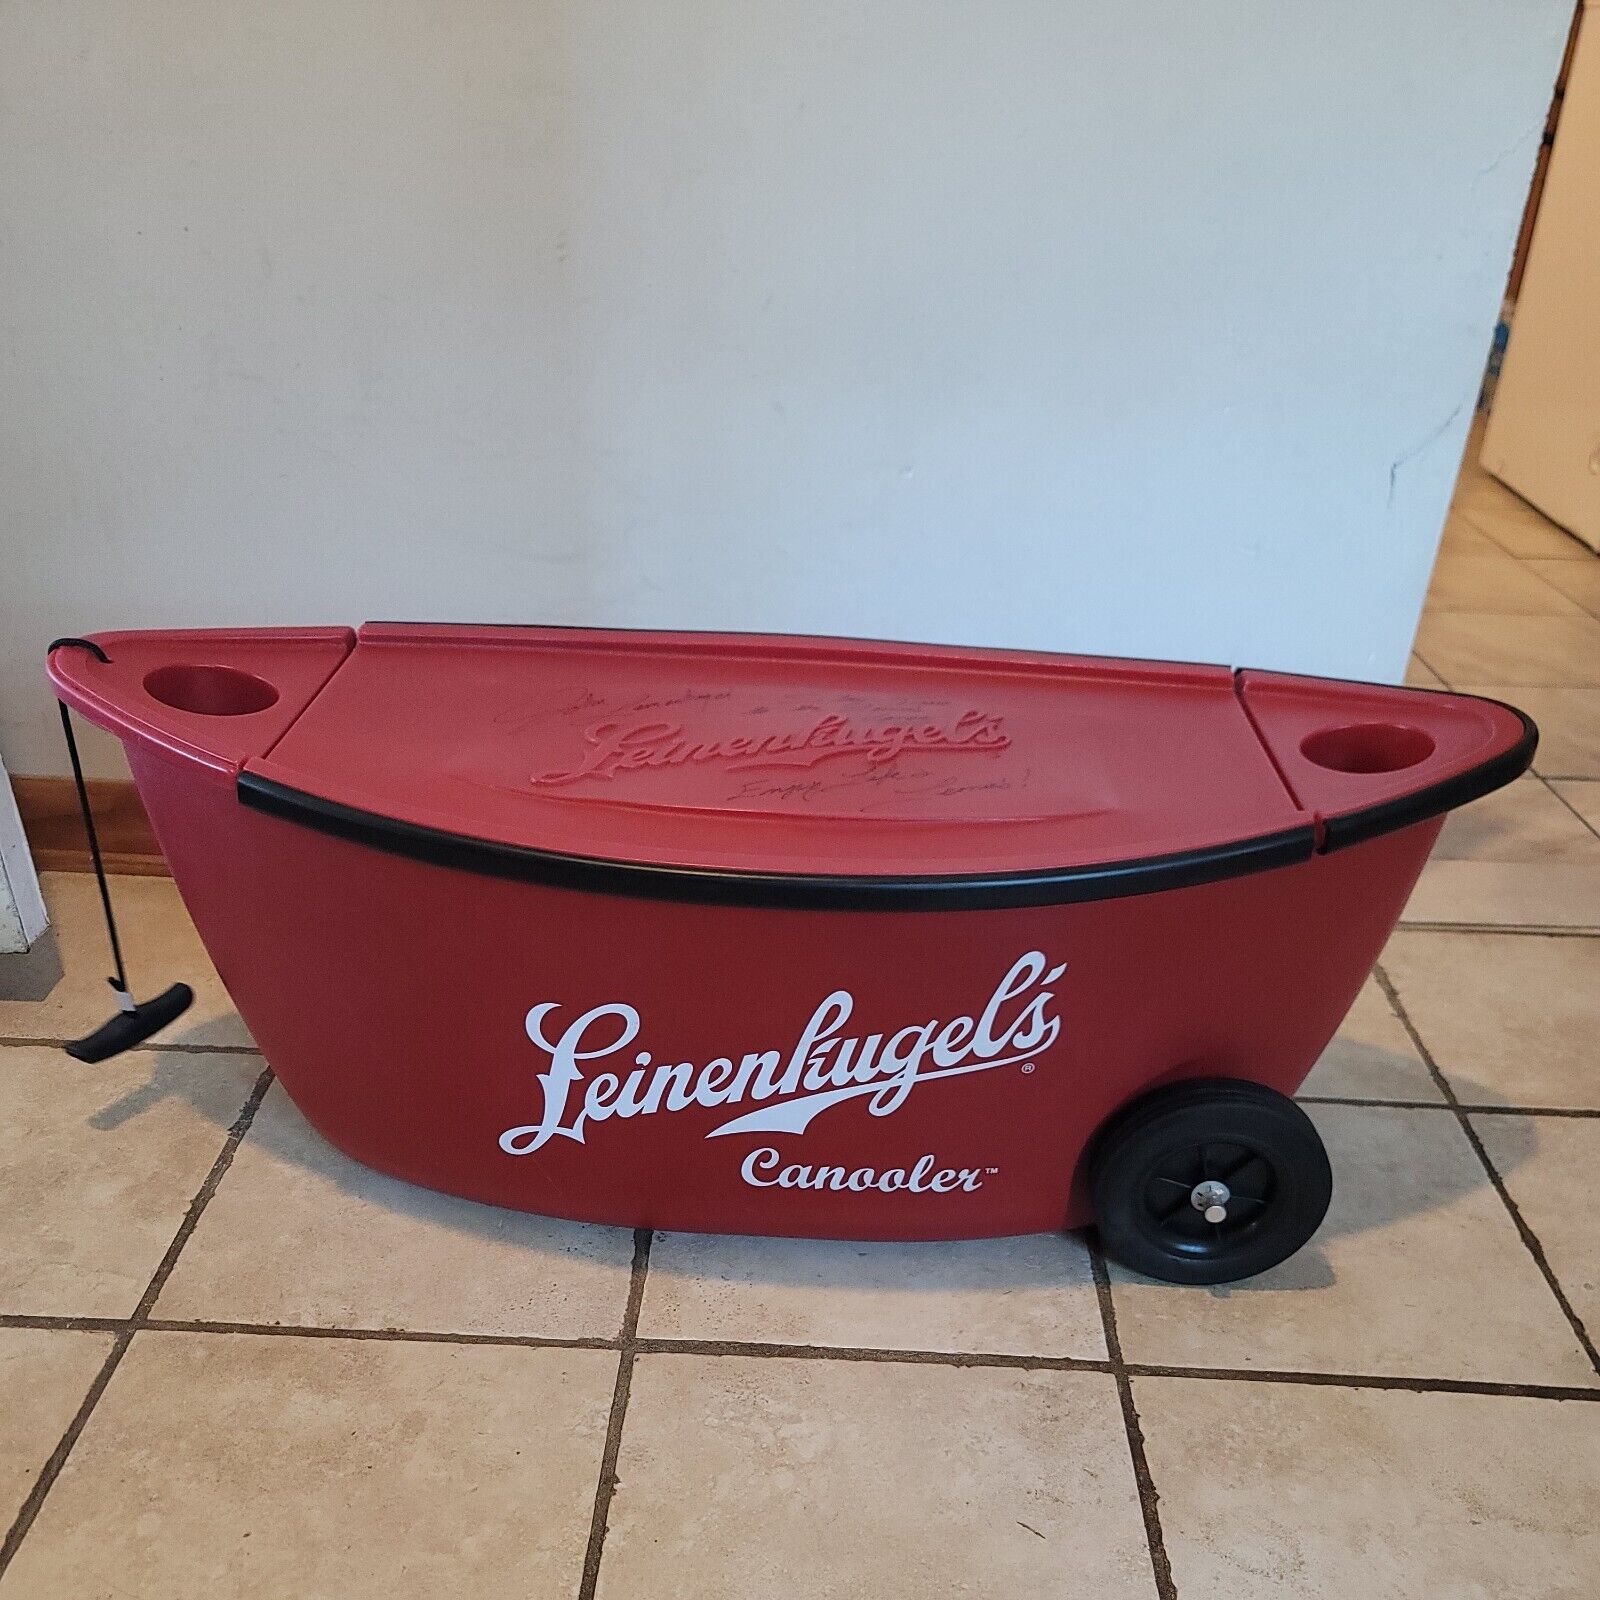 SIGNED Leinenkugel’s Canoe Beer Cooler Canooler With Wheels 3 Foot Ice Chest